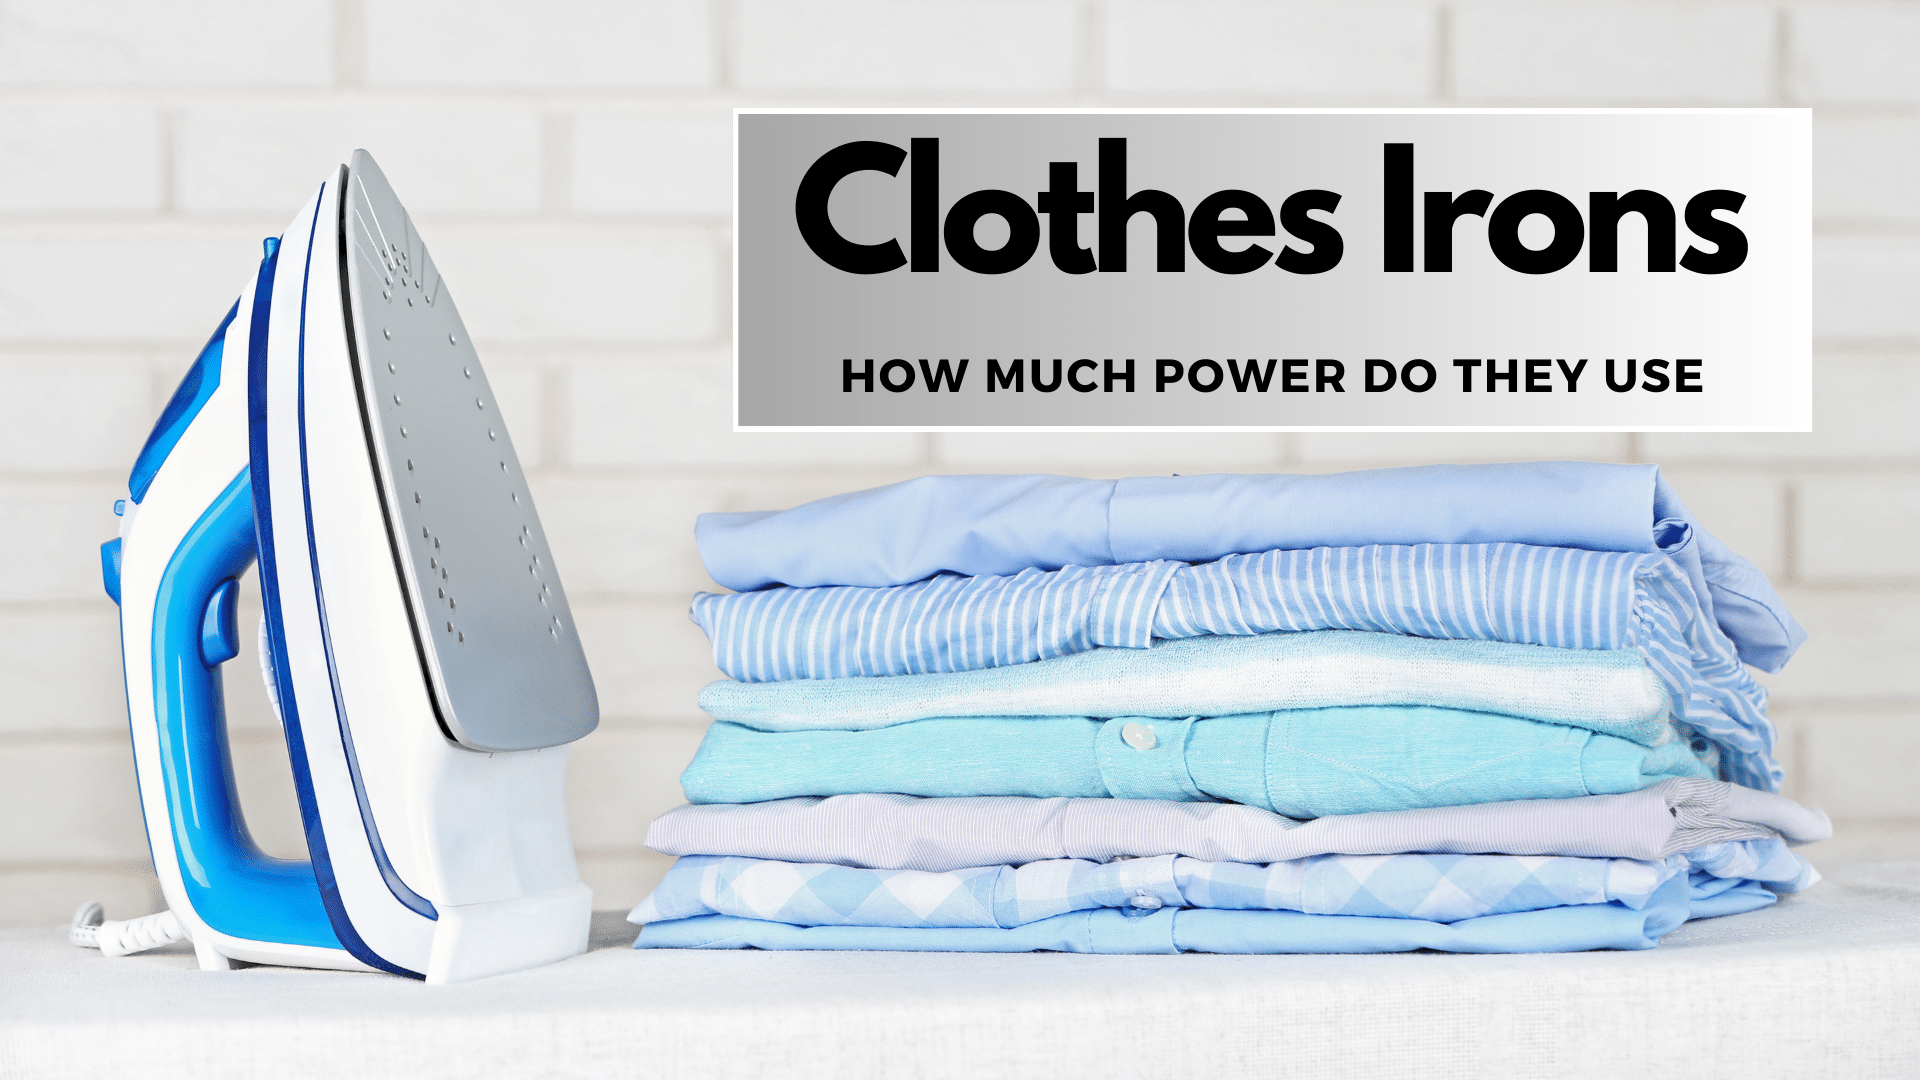 Image of clothes iron next to a stack of folded clothes.